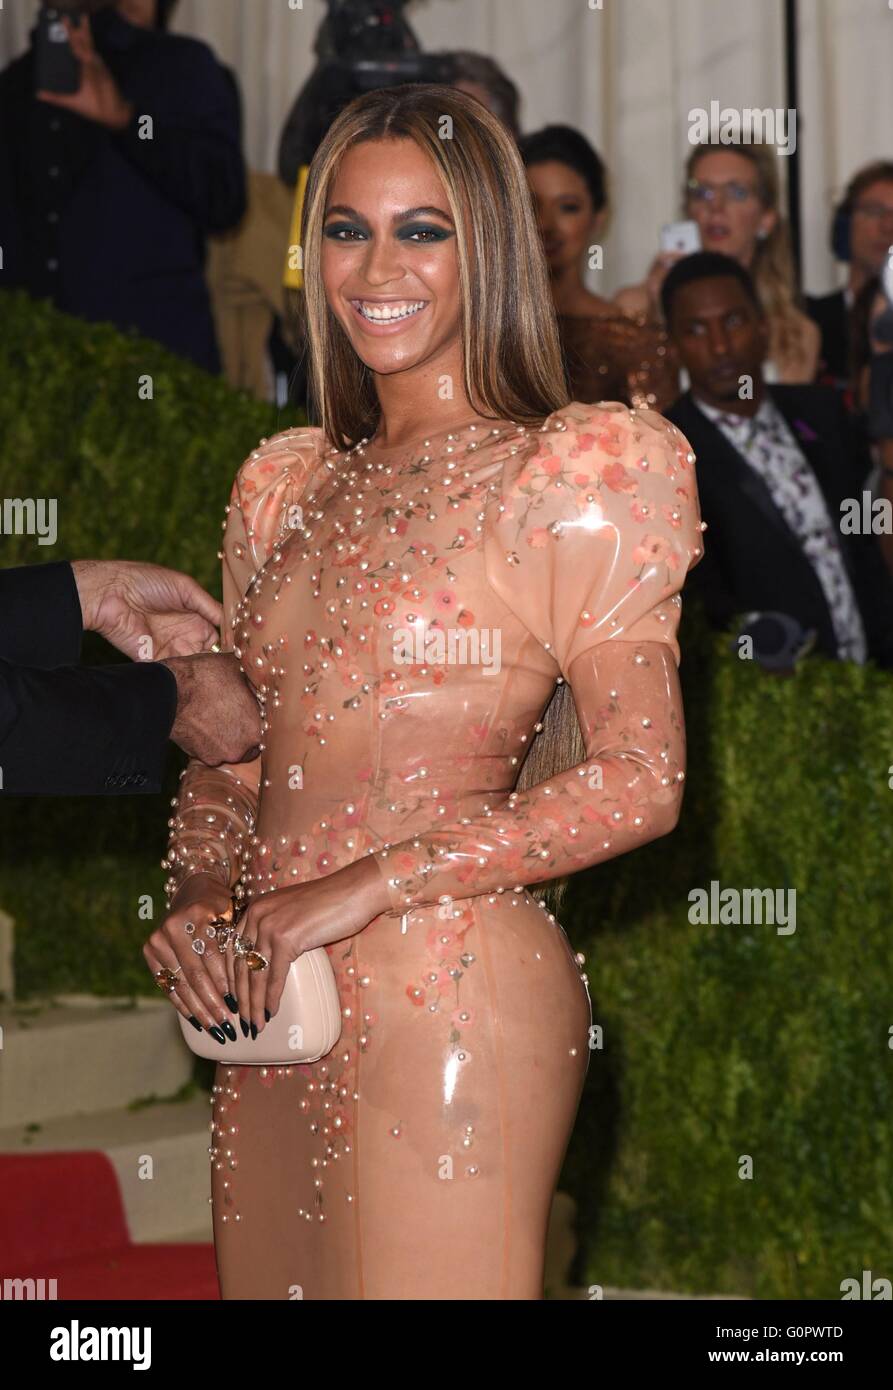 Beyonce Knowles-Carter at arrivals for Manus x Machina: Fashion in an Age of Technology Opening Night Costume Institute Annual Gala - Part 3, Metropolitan Museum of Art, New York, NY May 2, 2016. Photo By: Derek Storm/Everett Collection Stock Photo